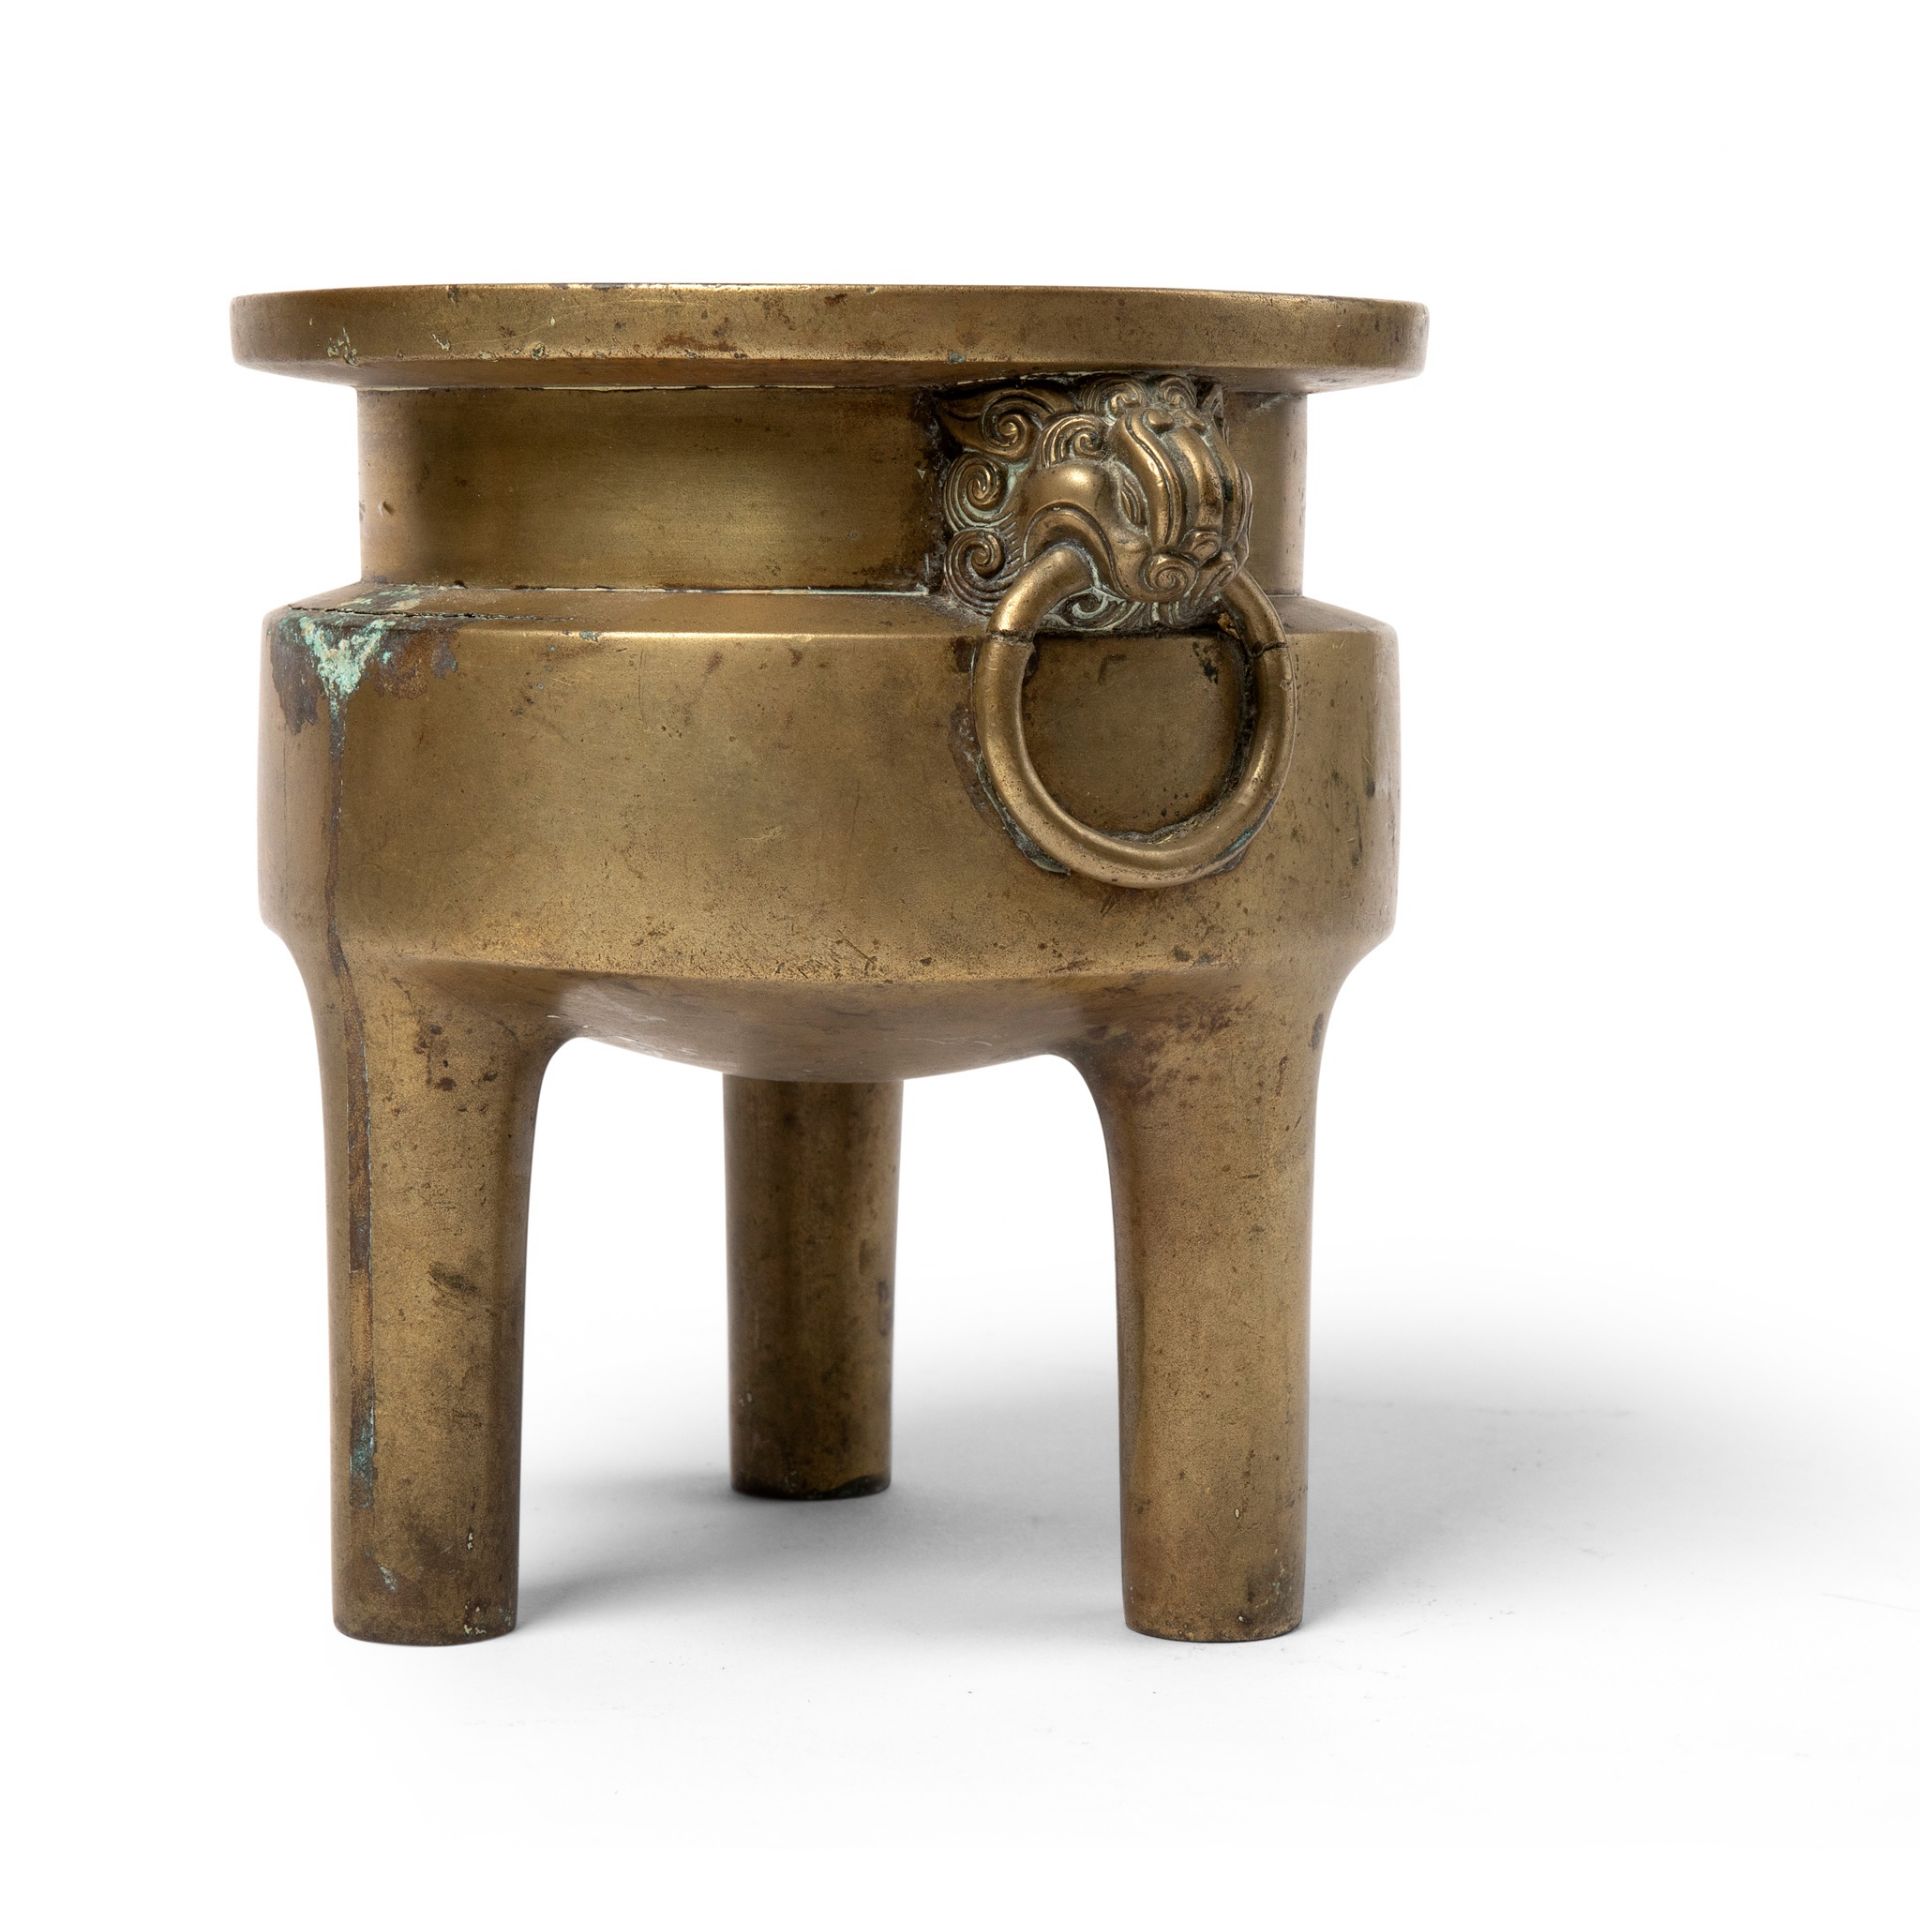 BRONZE INCENSE BURNER OF DING FORM MING TO QING DYNASTY, 17TH-18TH CENTURY - Image 2 of 3